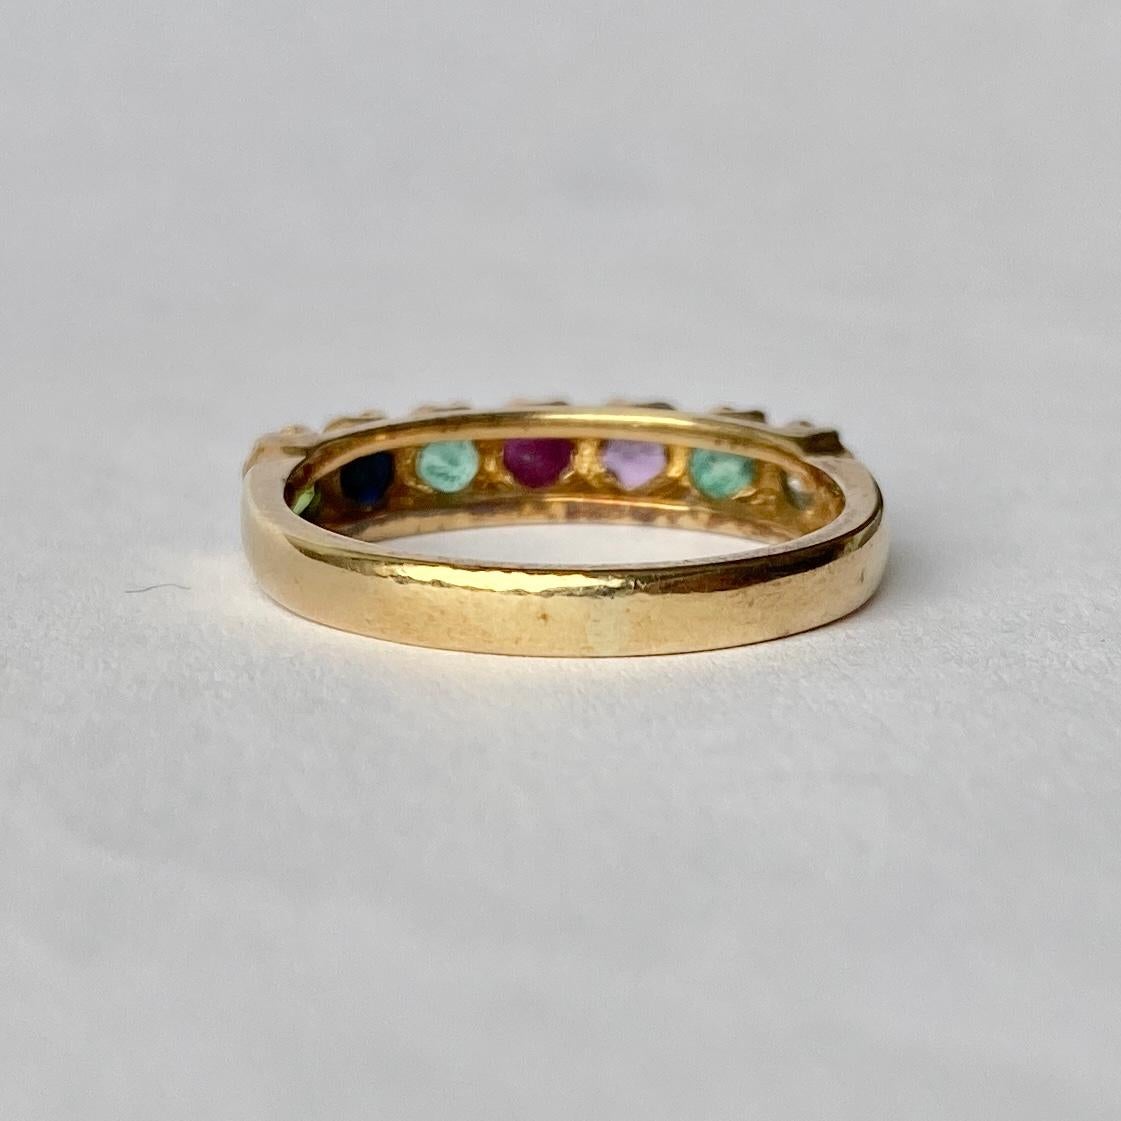 This regard ring holds a Diamond, Emerald, Amethyst, Ruby, Emerald, Sapphire and Tourmaline which spell out DEAREST using the first letter of every stone. The stones are set flush in decorative settings and the ring is modelled in 9ct gold.